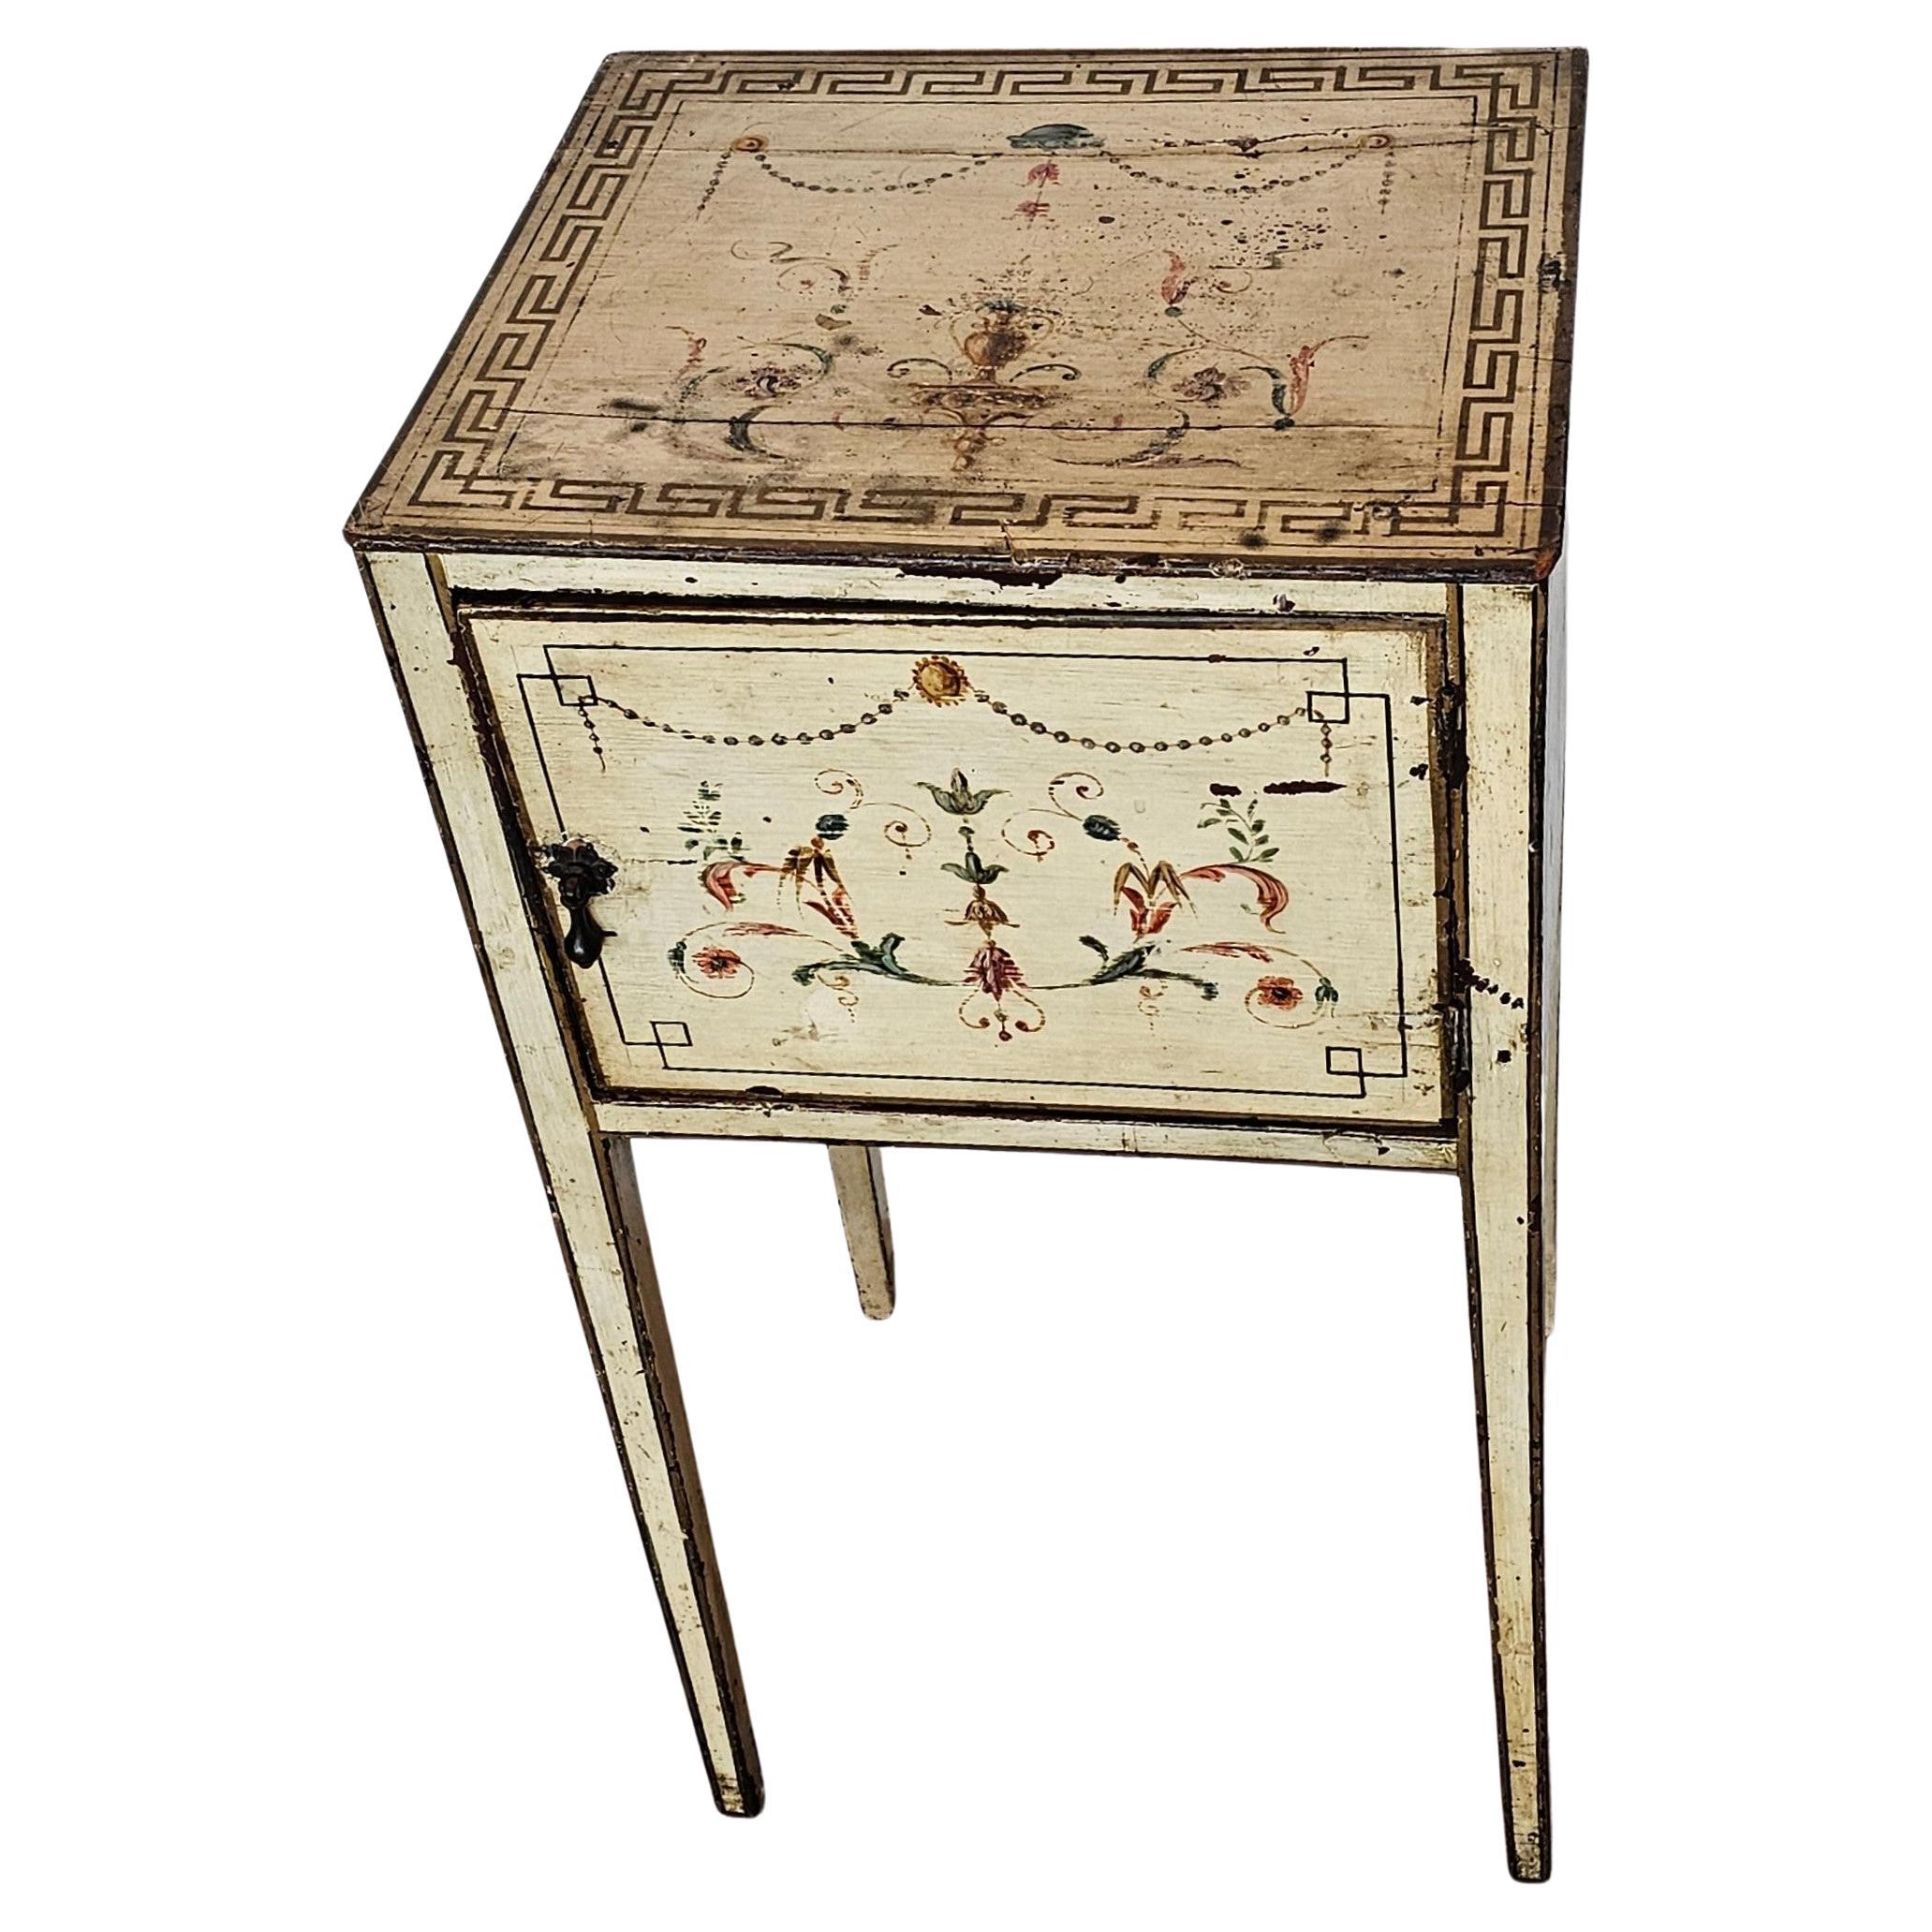 19th Century Italian Neo-classical Revival Hand-Painted Nightstand Table For Sale